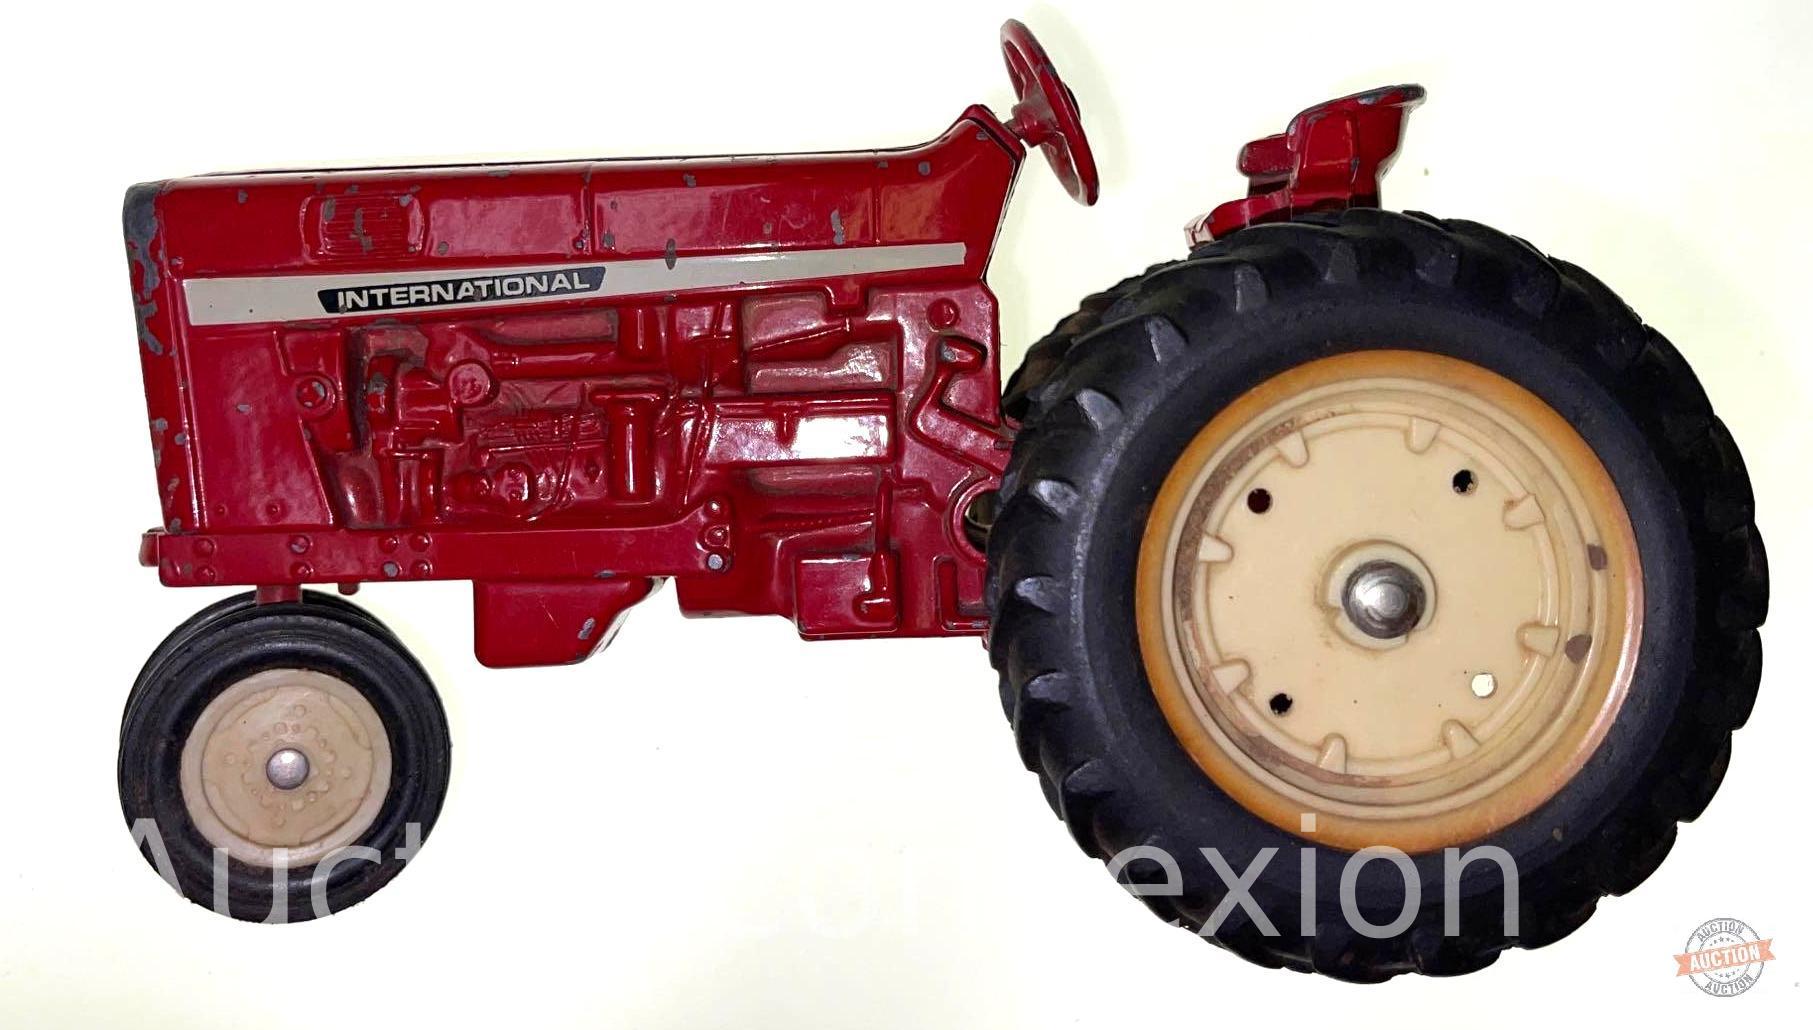 Toys - 2 Collectible tractors, Hubley Jr.